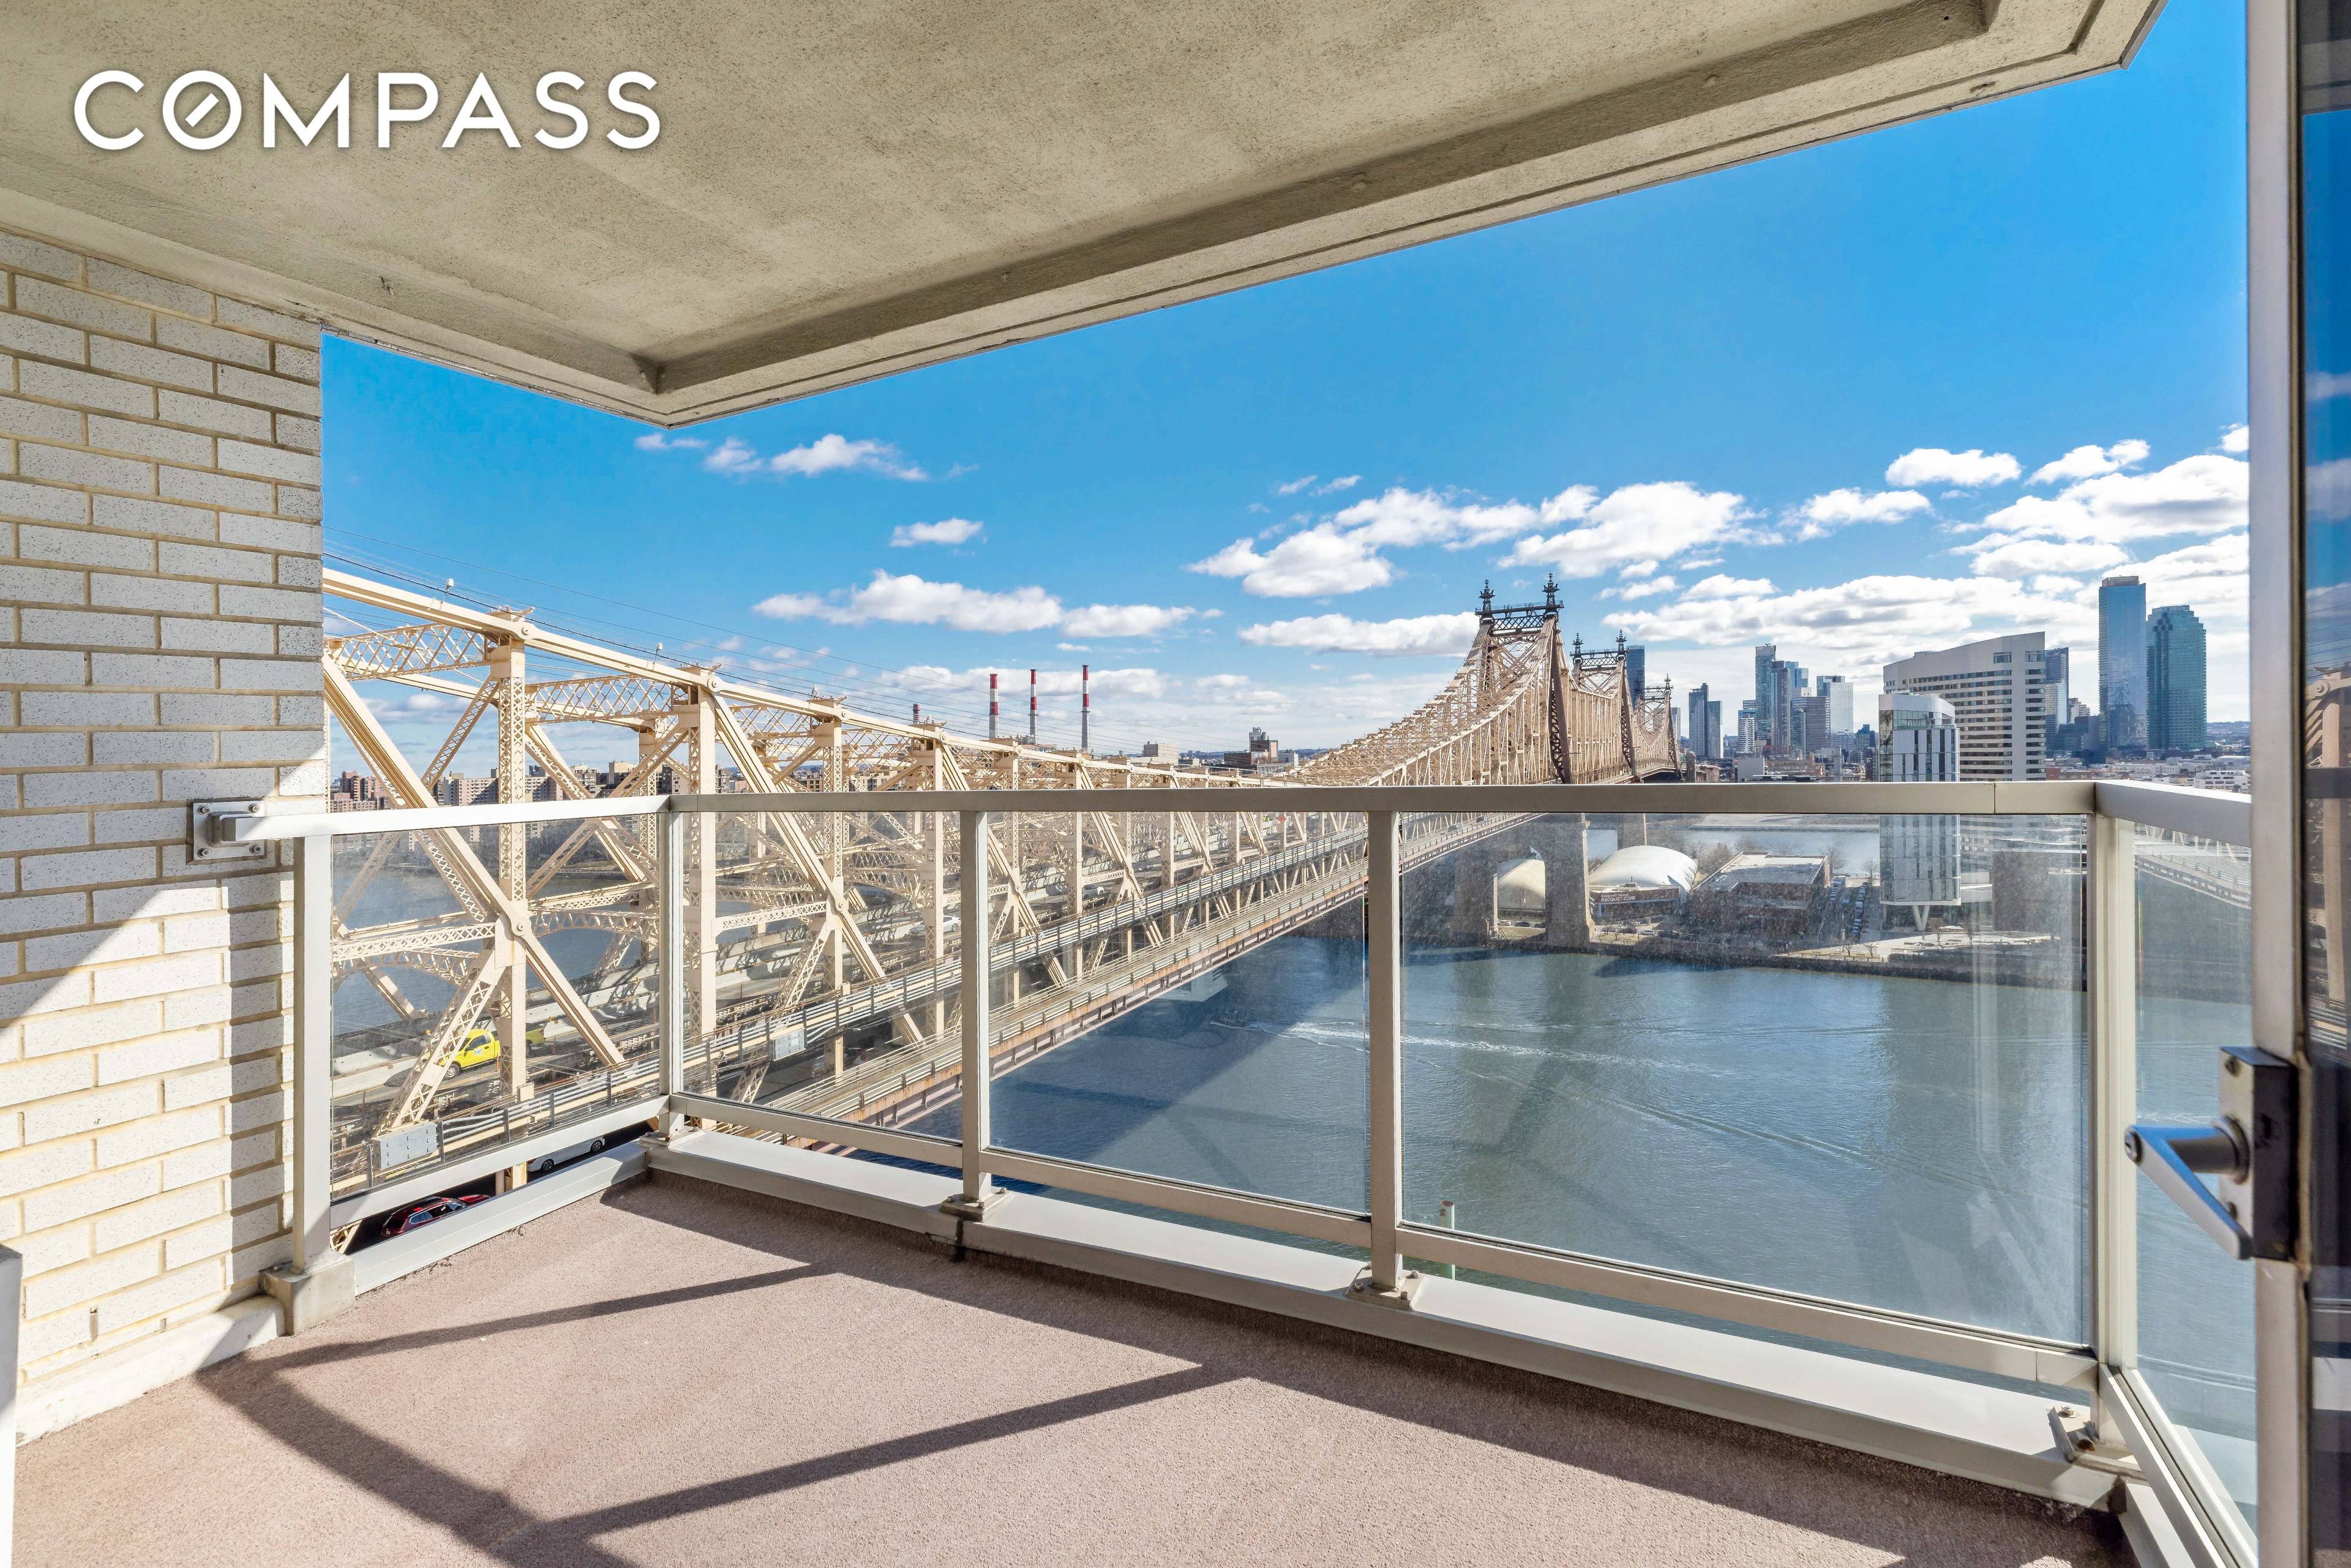 Make jaw dropping bridge and river views your daily backdrop in this extraordinary three bedroom, three bathroom home with private outdoor space in a revered Sutton Place cooperative.